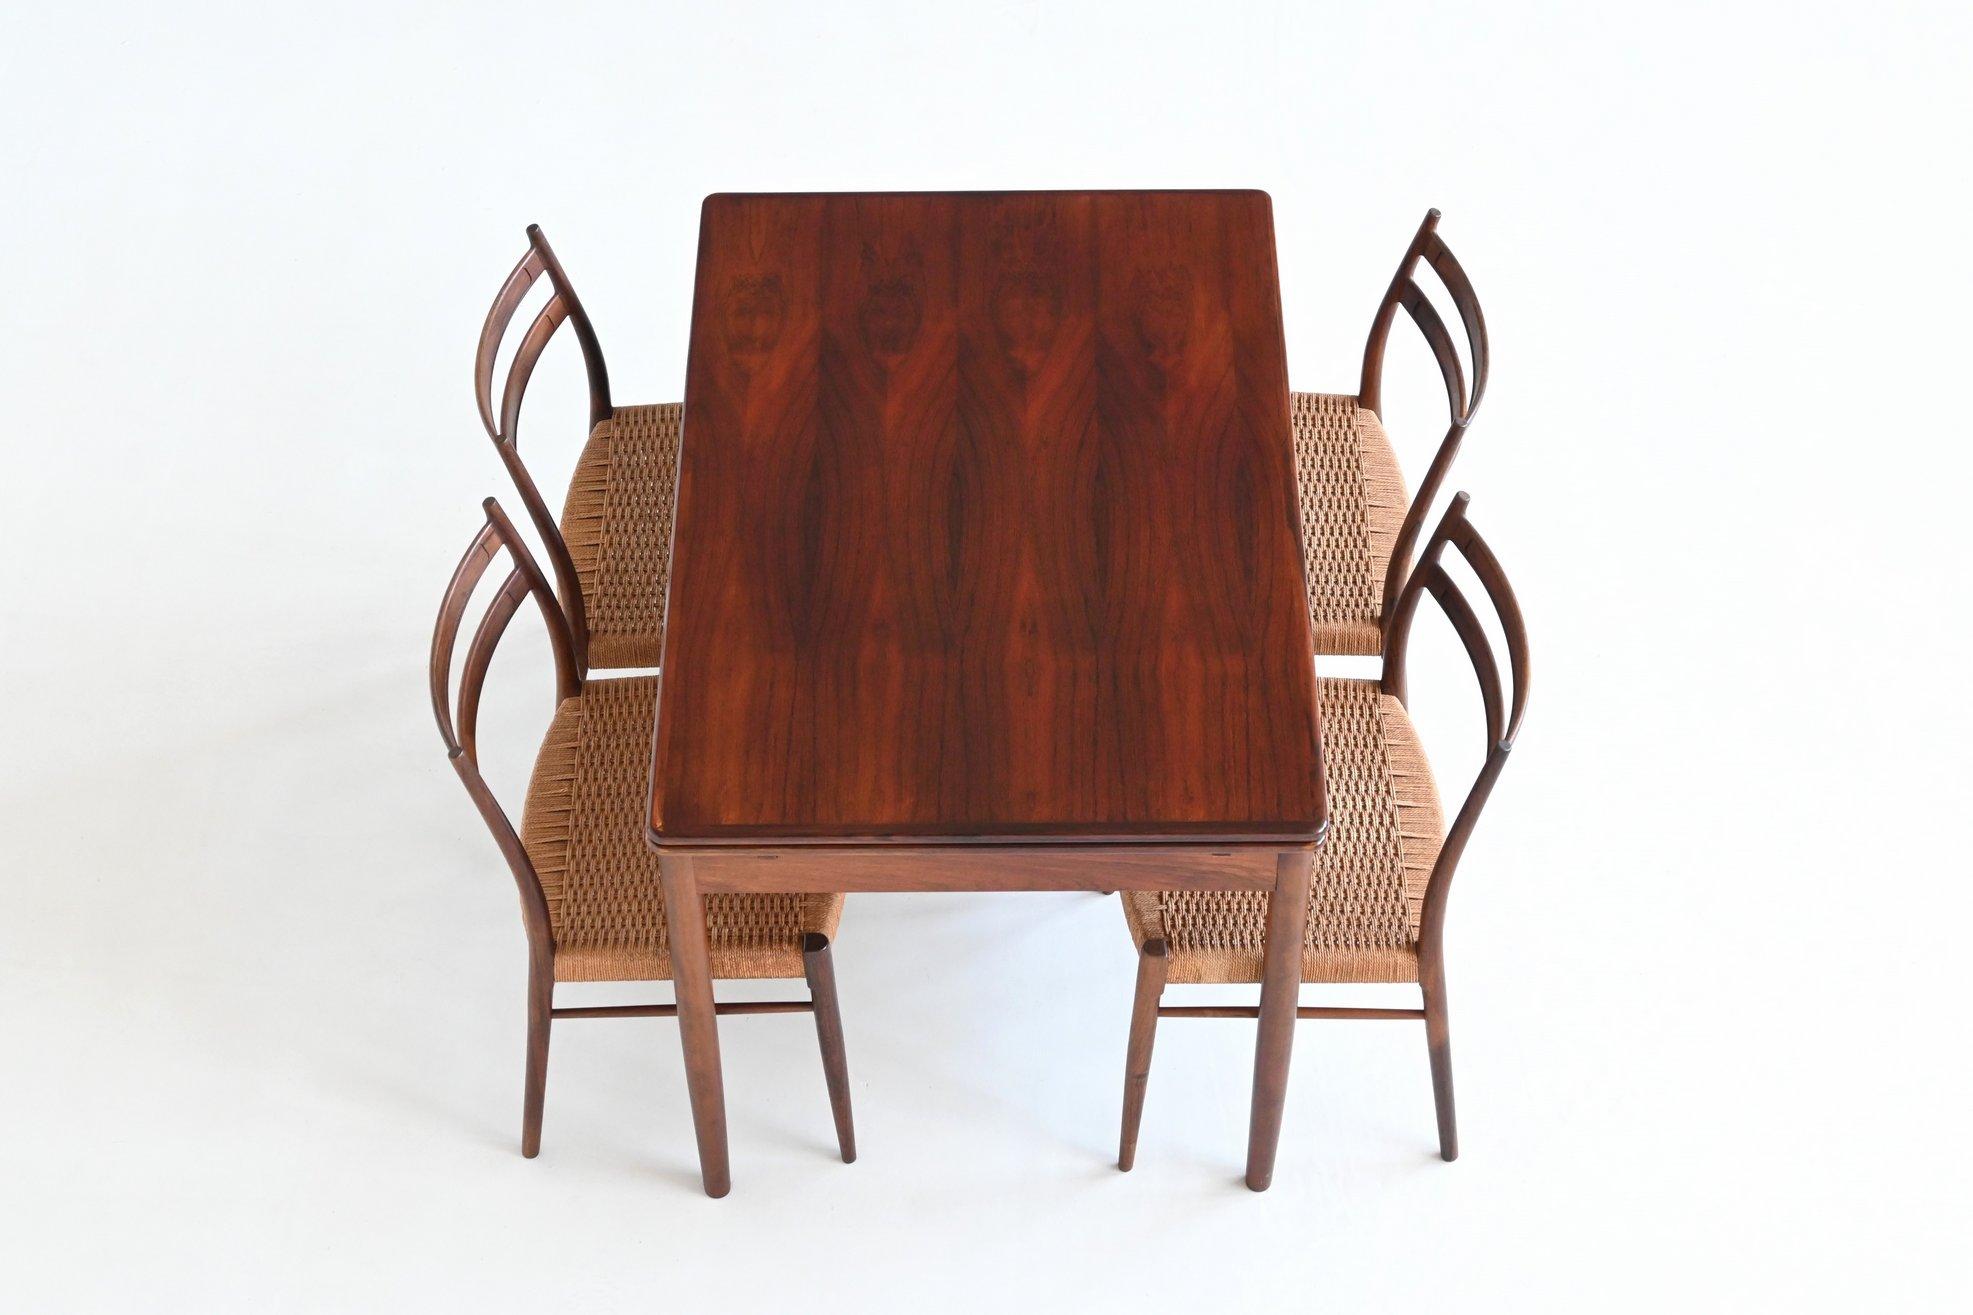 Beautiful hardwood extendable dining table by unknown designer or manufacturer, Denmark 1960. This well-crafted table is made of beautiful grained and warm hardwood. The tapered legs are made of solid hardwood and could be dismantled easily for